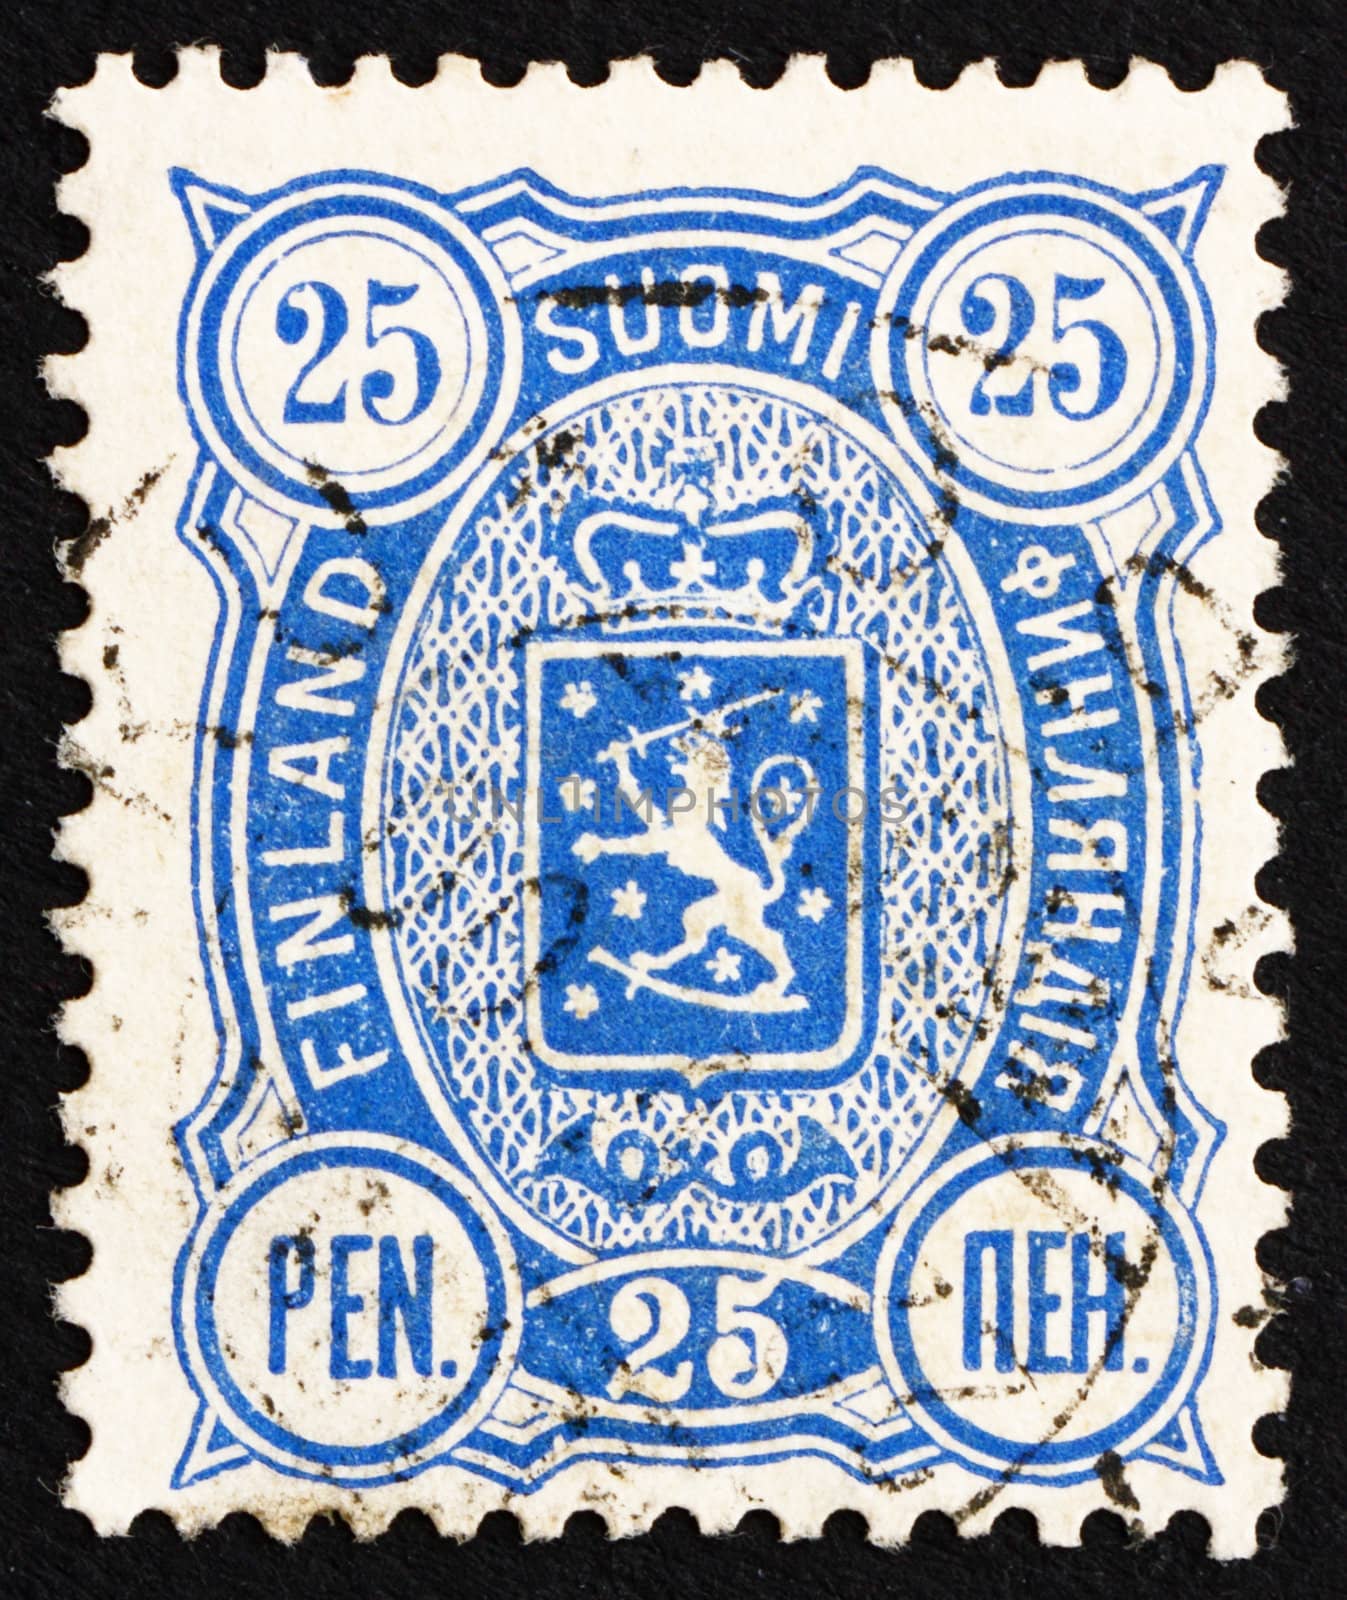 FINLAND - CIRCA 1895: a stamp printed in the Finland shows Crowned Lion Rampant, Arms of Finland under Russian Empire, circa 1895